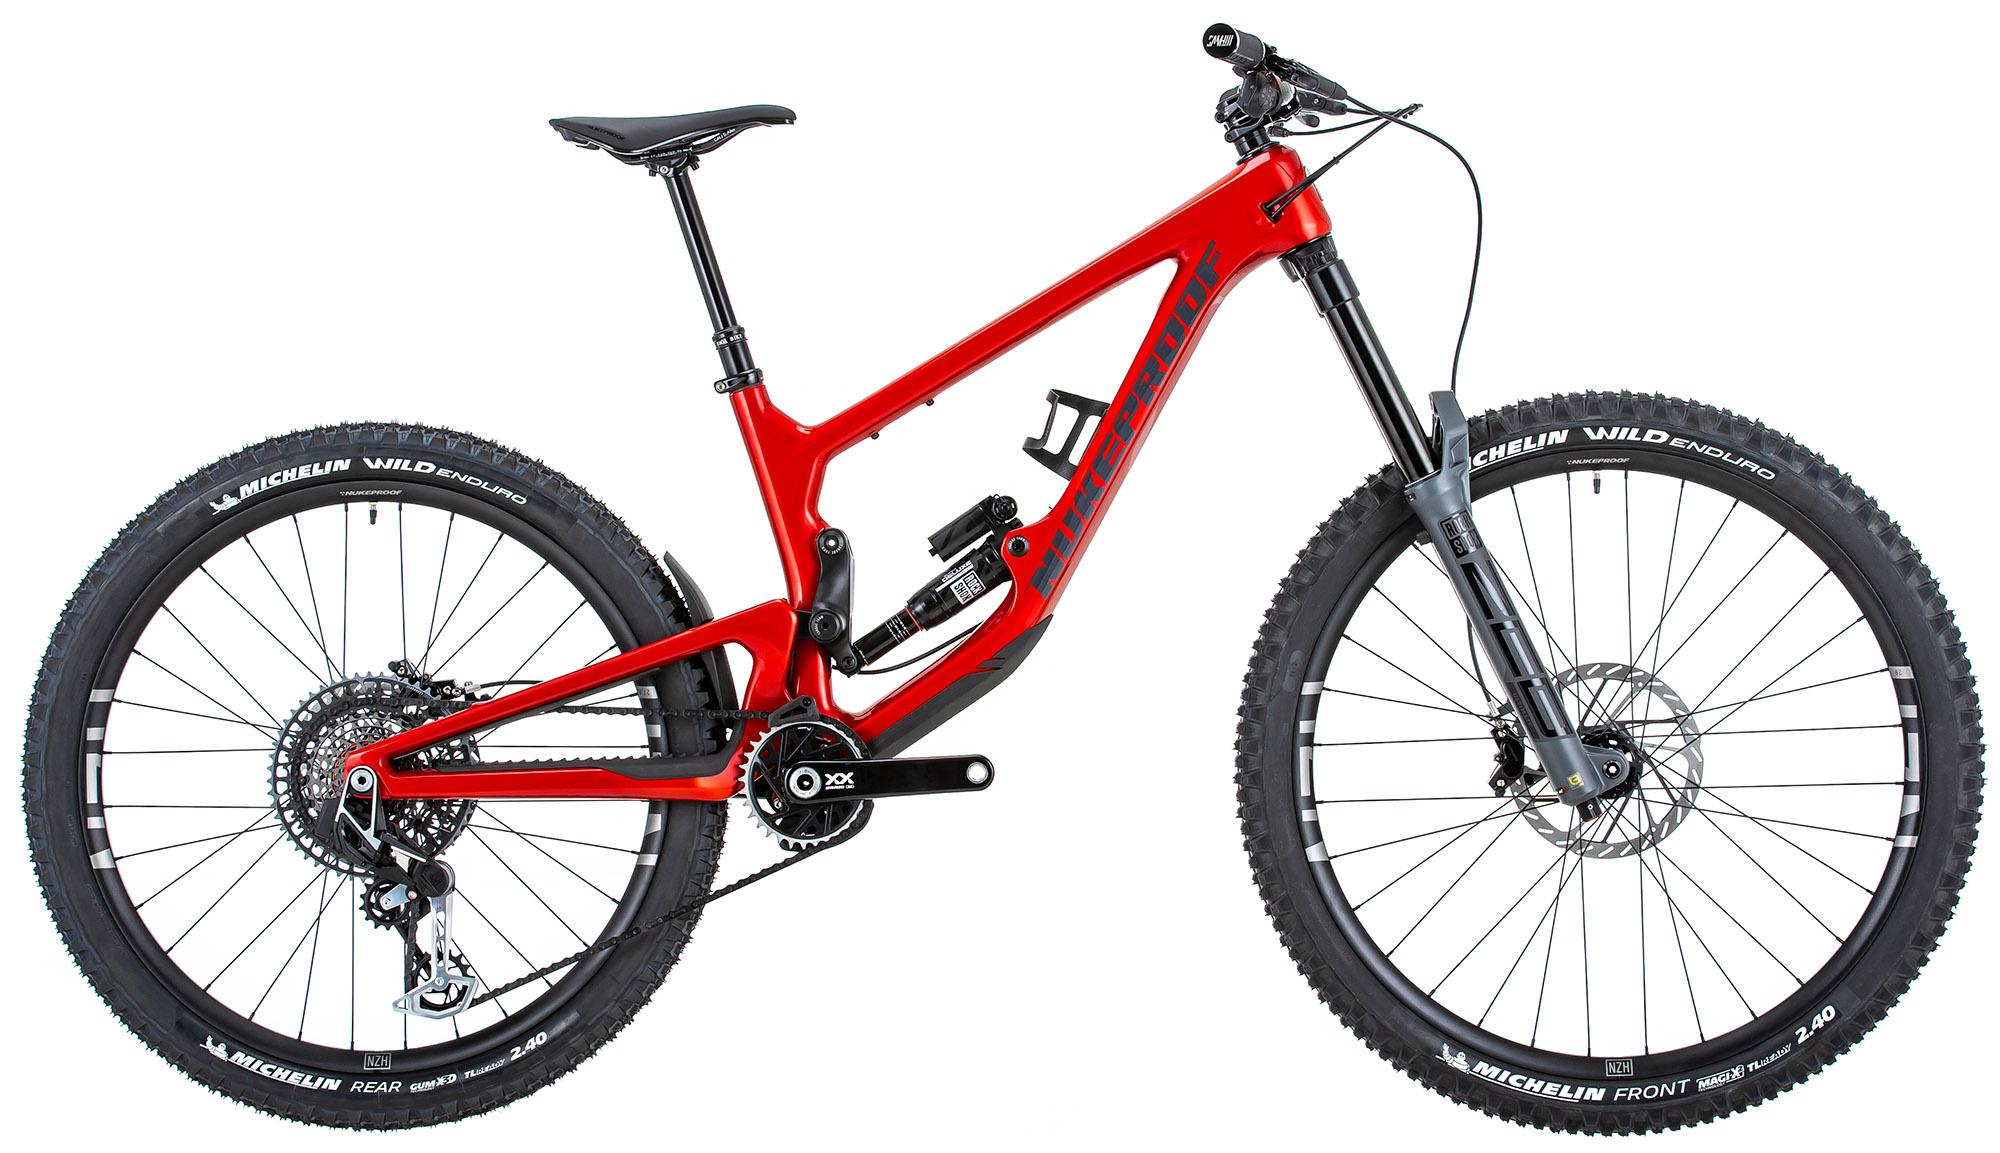 Nukeproof Giga 297 RS Carbon Bike (XX EAGLE TRANS), Racing Red